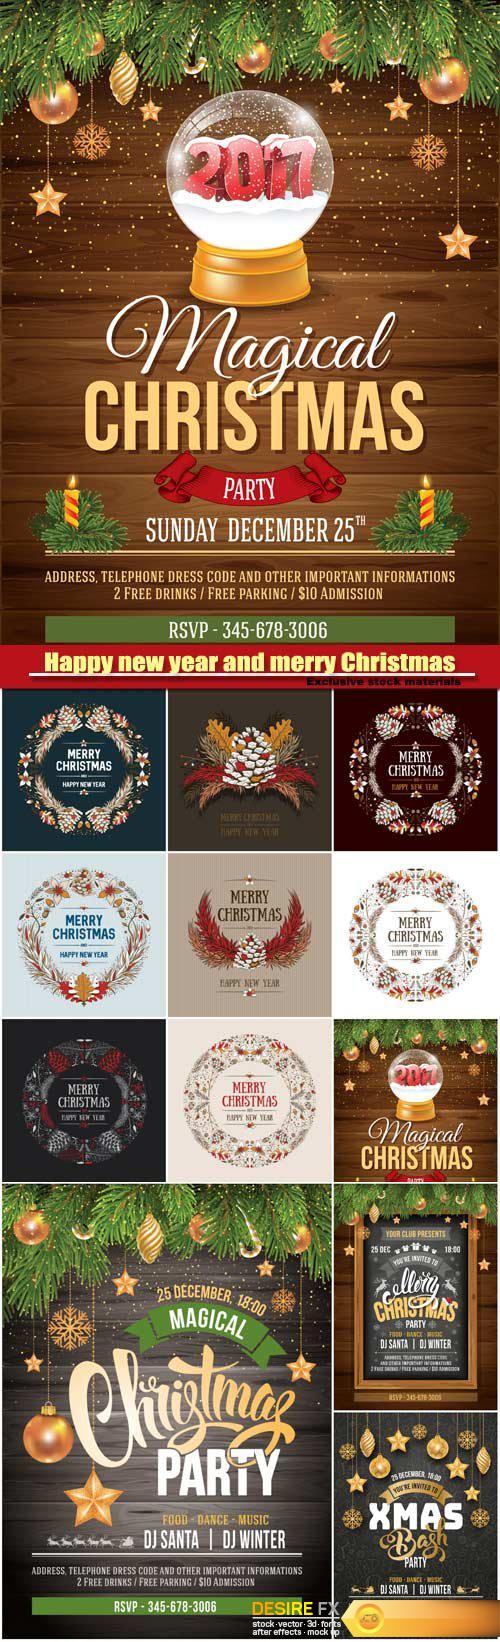 Frame Christmas design, luxury template design for Christmas party